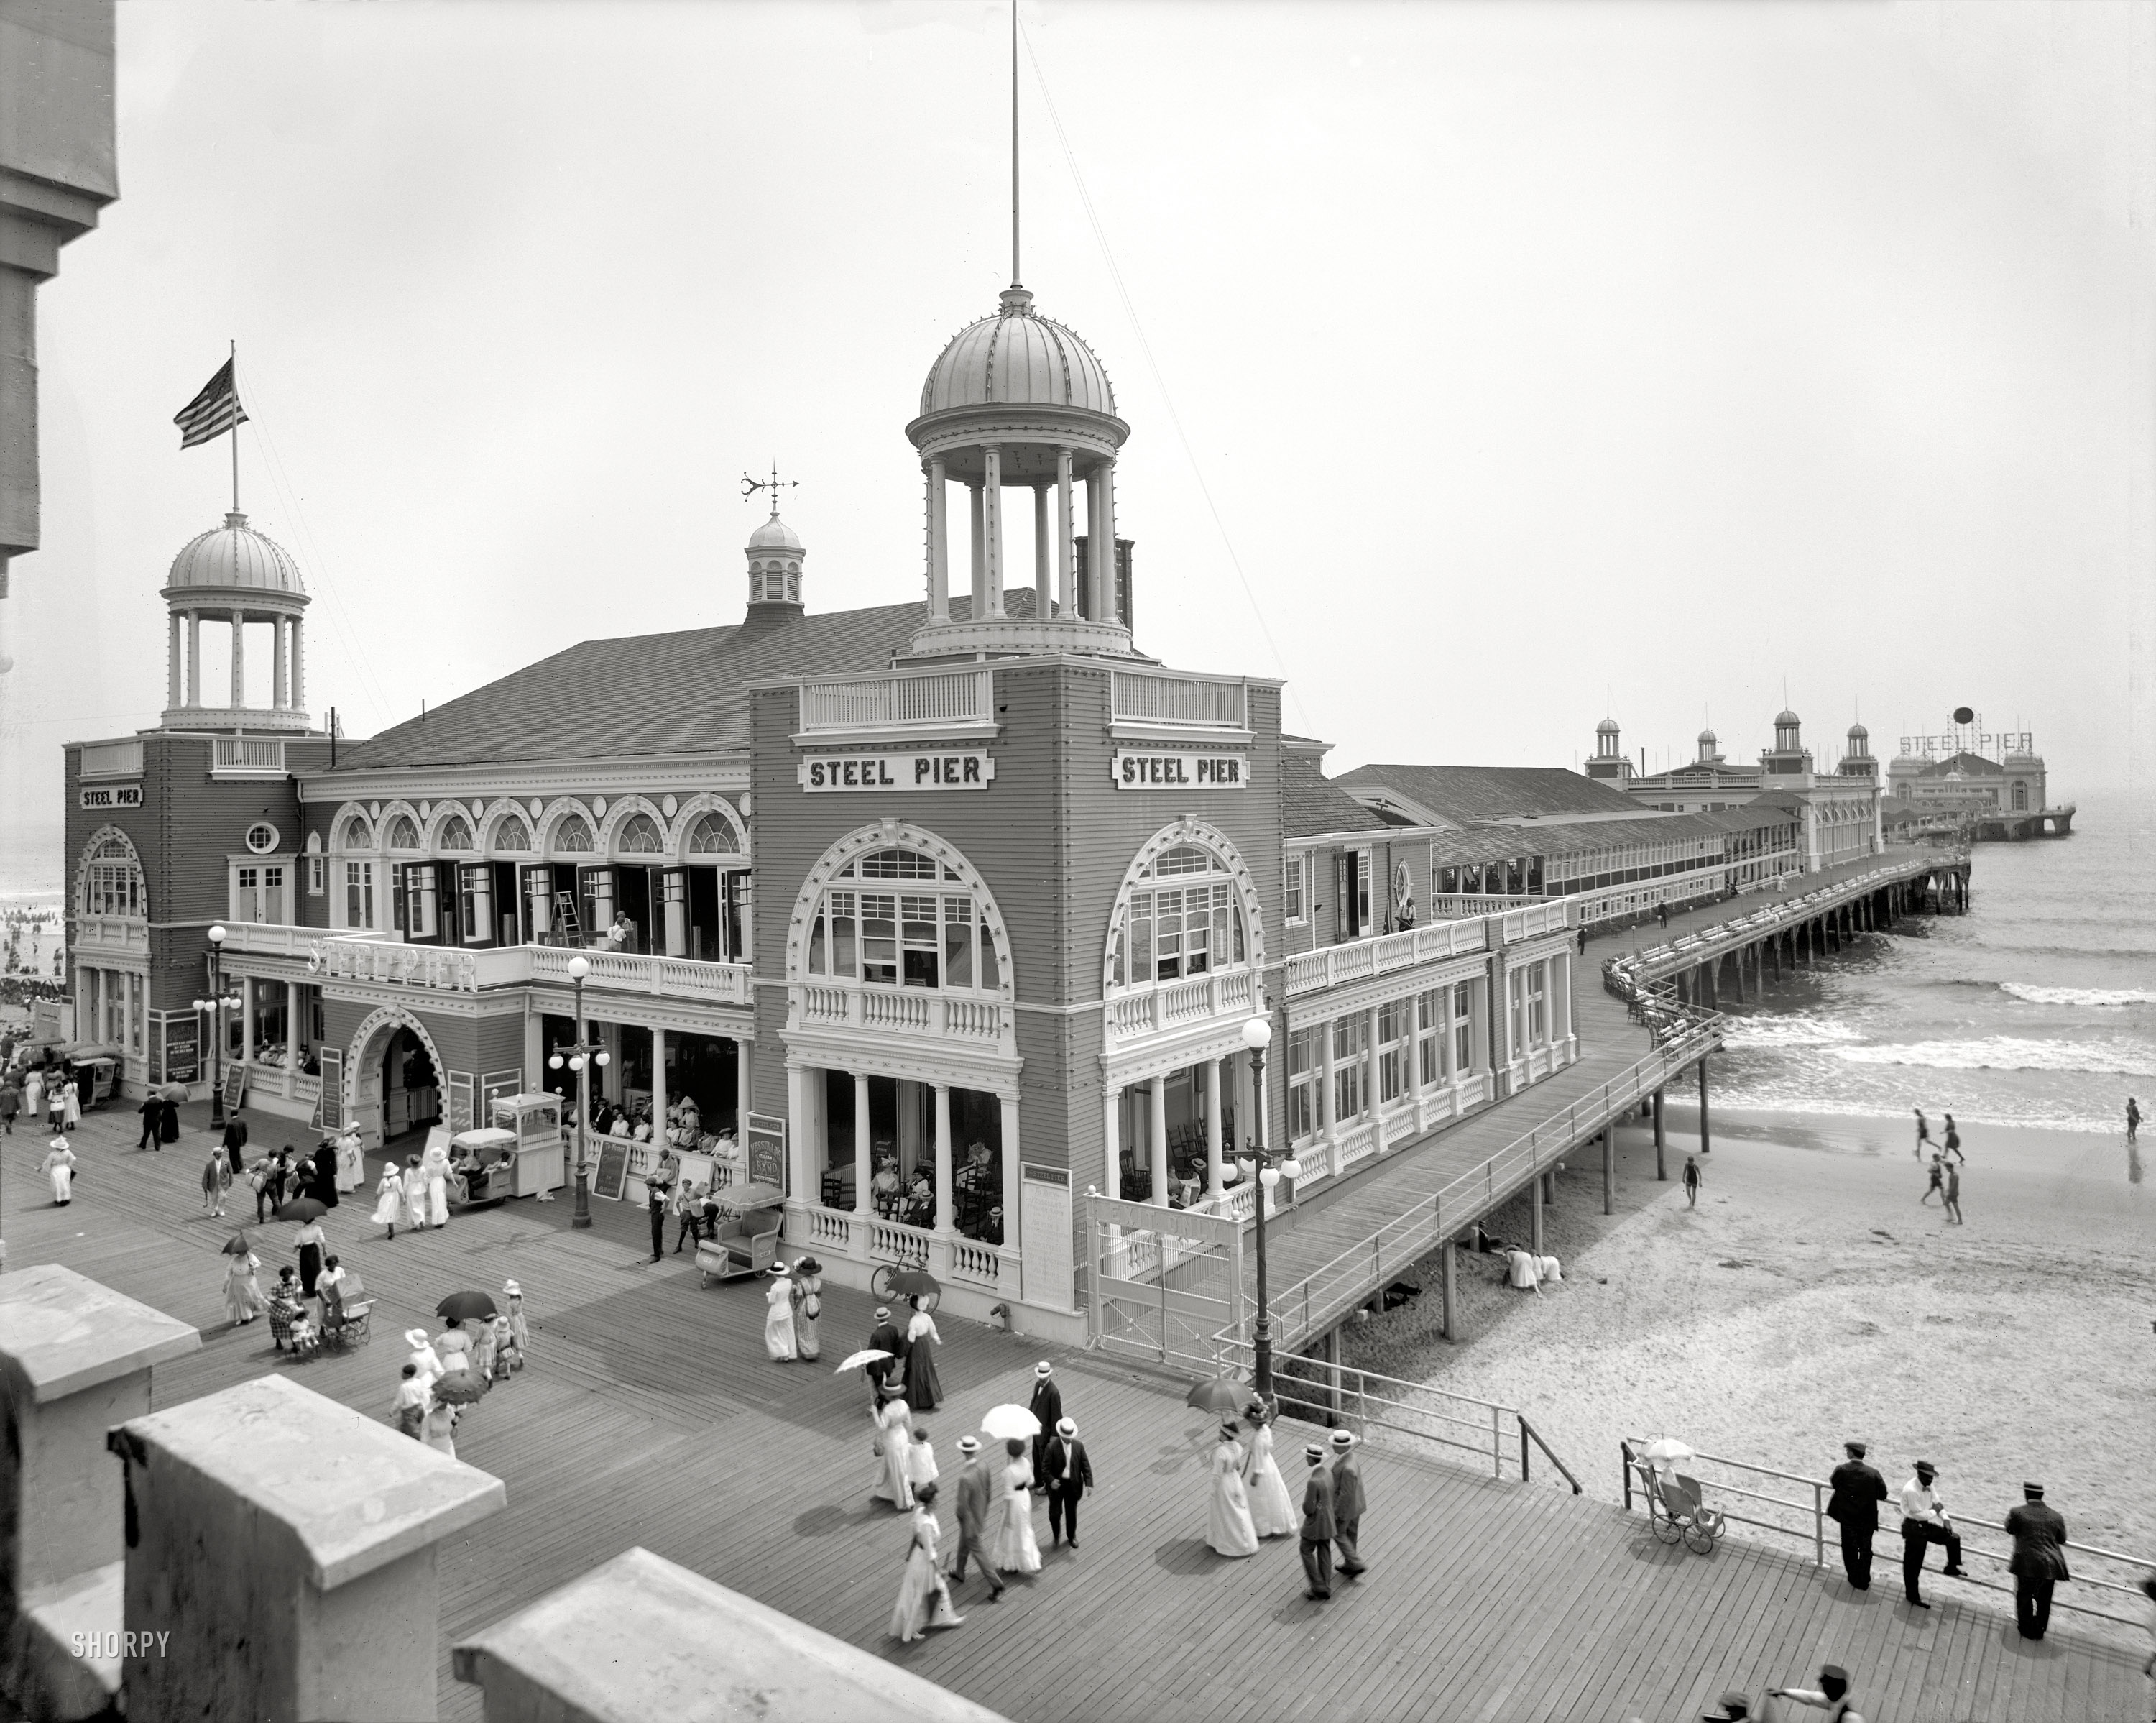 The Jersey Shore circa 1910. "Steel Pier, Atlantic City." 8x10 inch dry plate glass negative, Detroit Publishing Company. View full size.